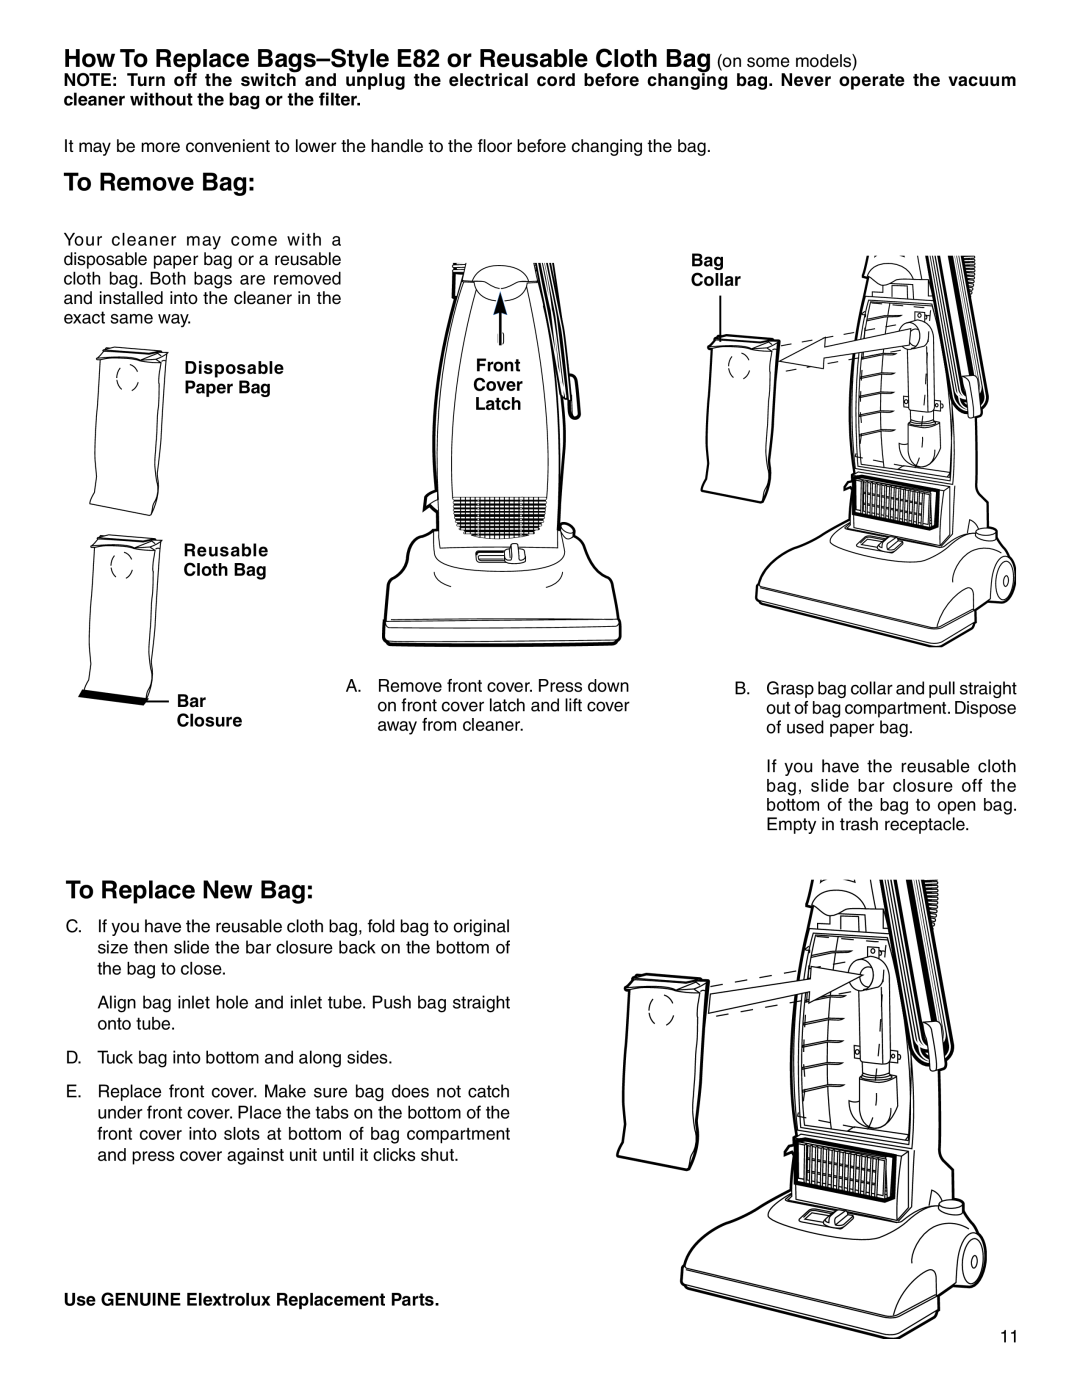 Electrolux Z2270-Z2290 Series manual How To Replace Bags-Style E82 or Reusable Cloth Bag on some models, To Remove Bag 